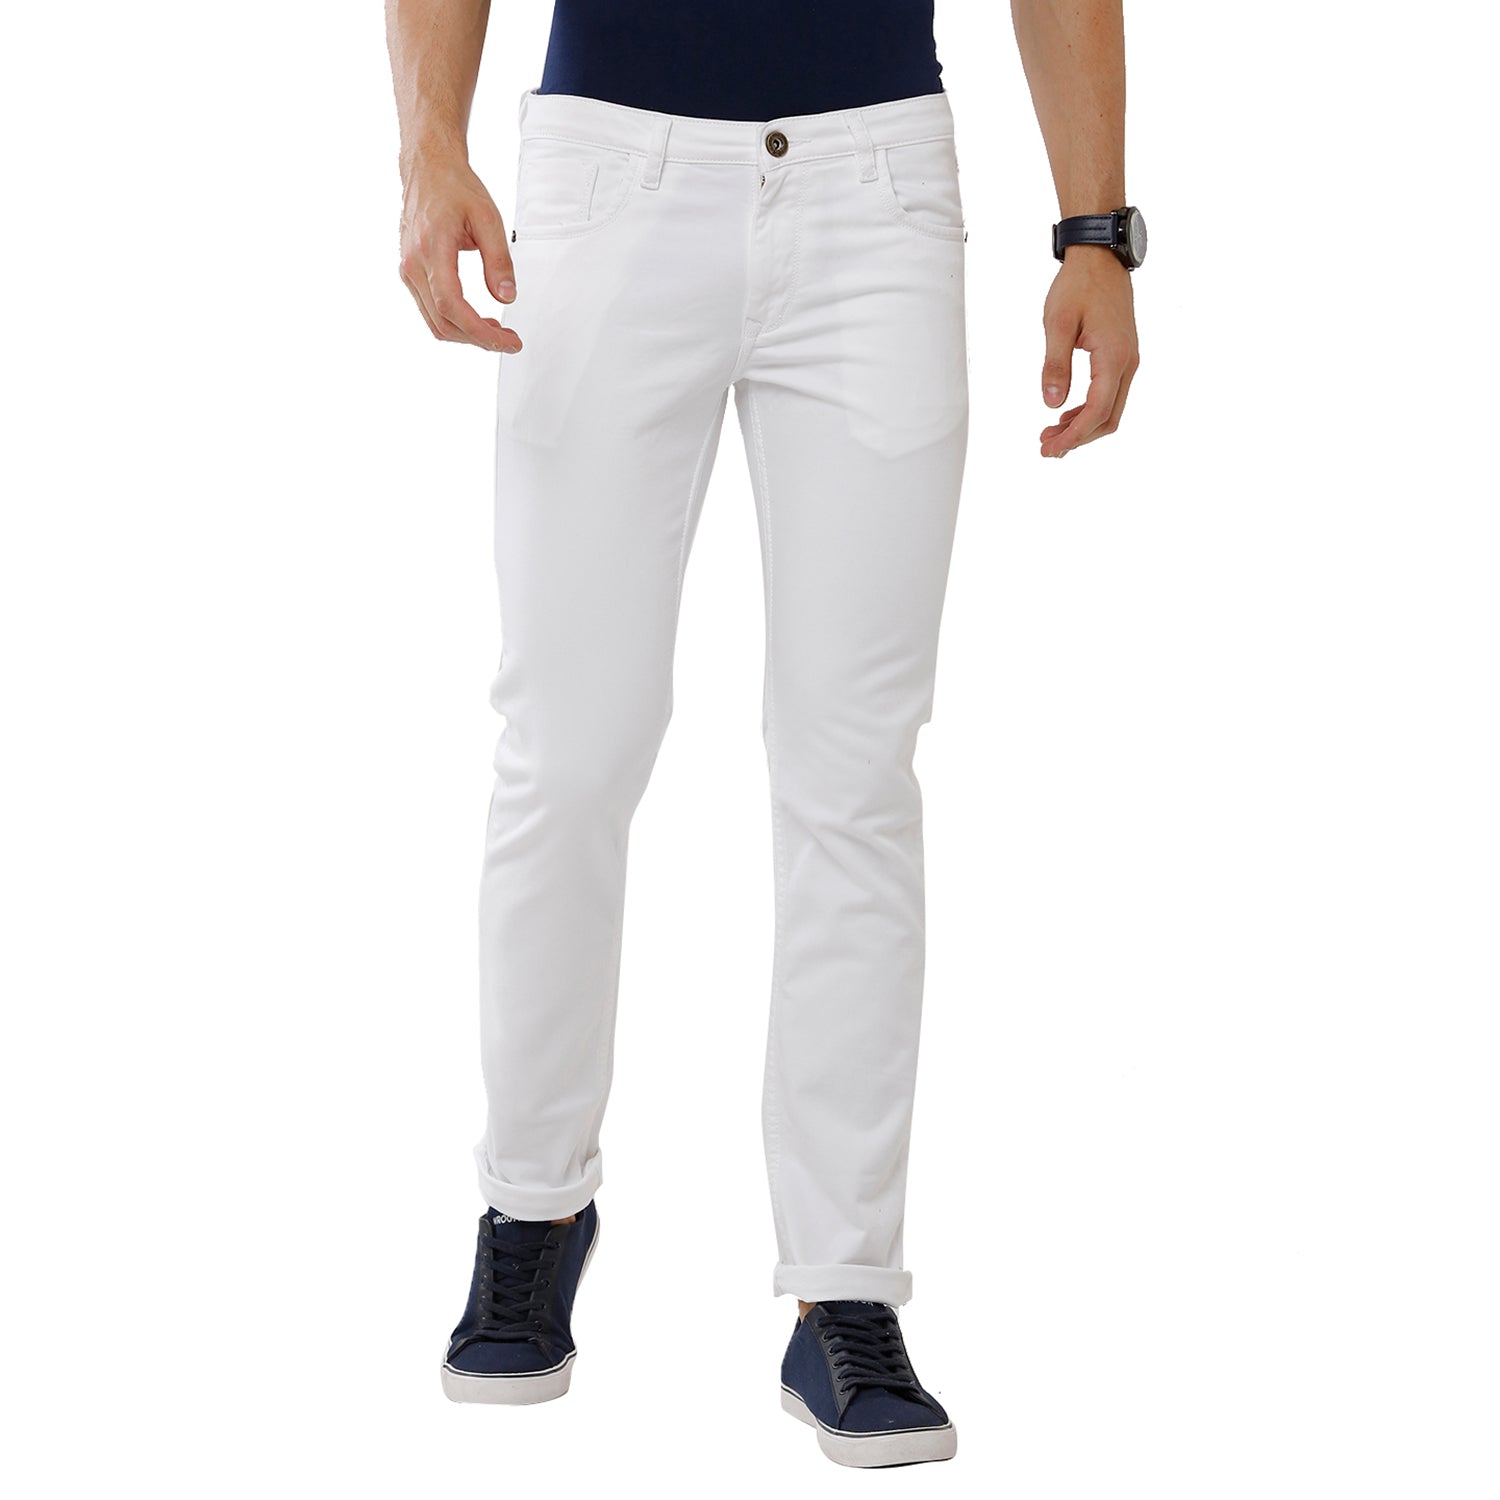 Classic Polo Mens 100% Cotton Solid Slim Fit White Color Denim (CPDN1-01 A-WHT-SL-LY) Jeans Classic Polo 